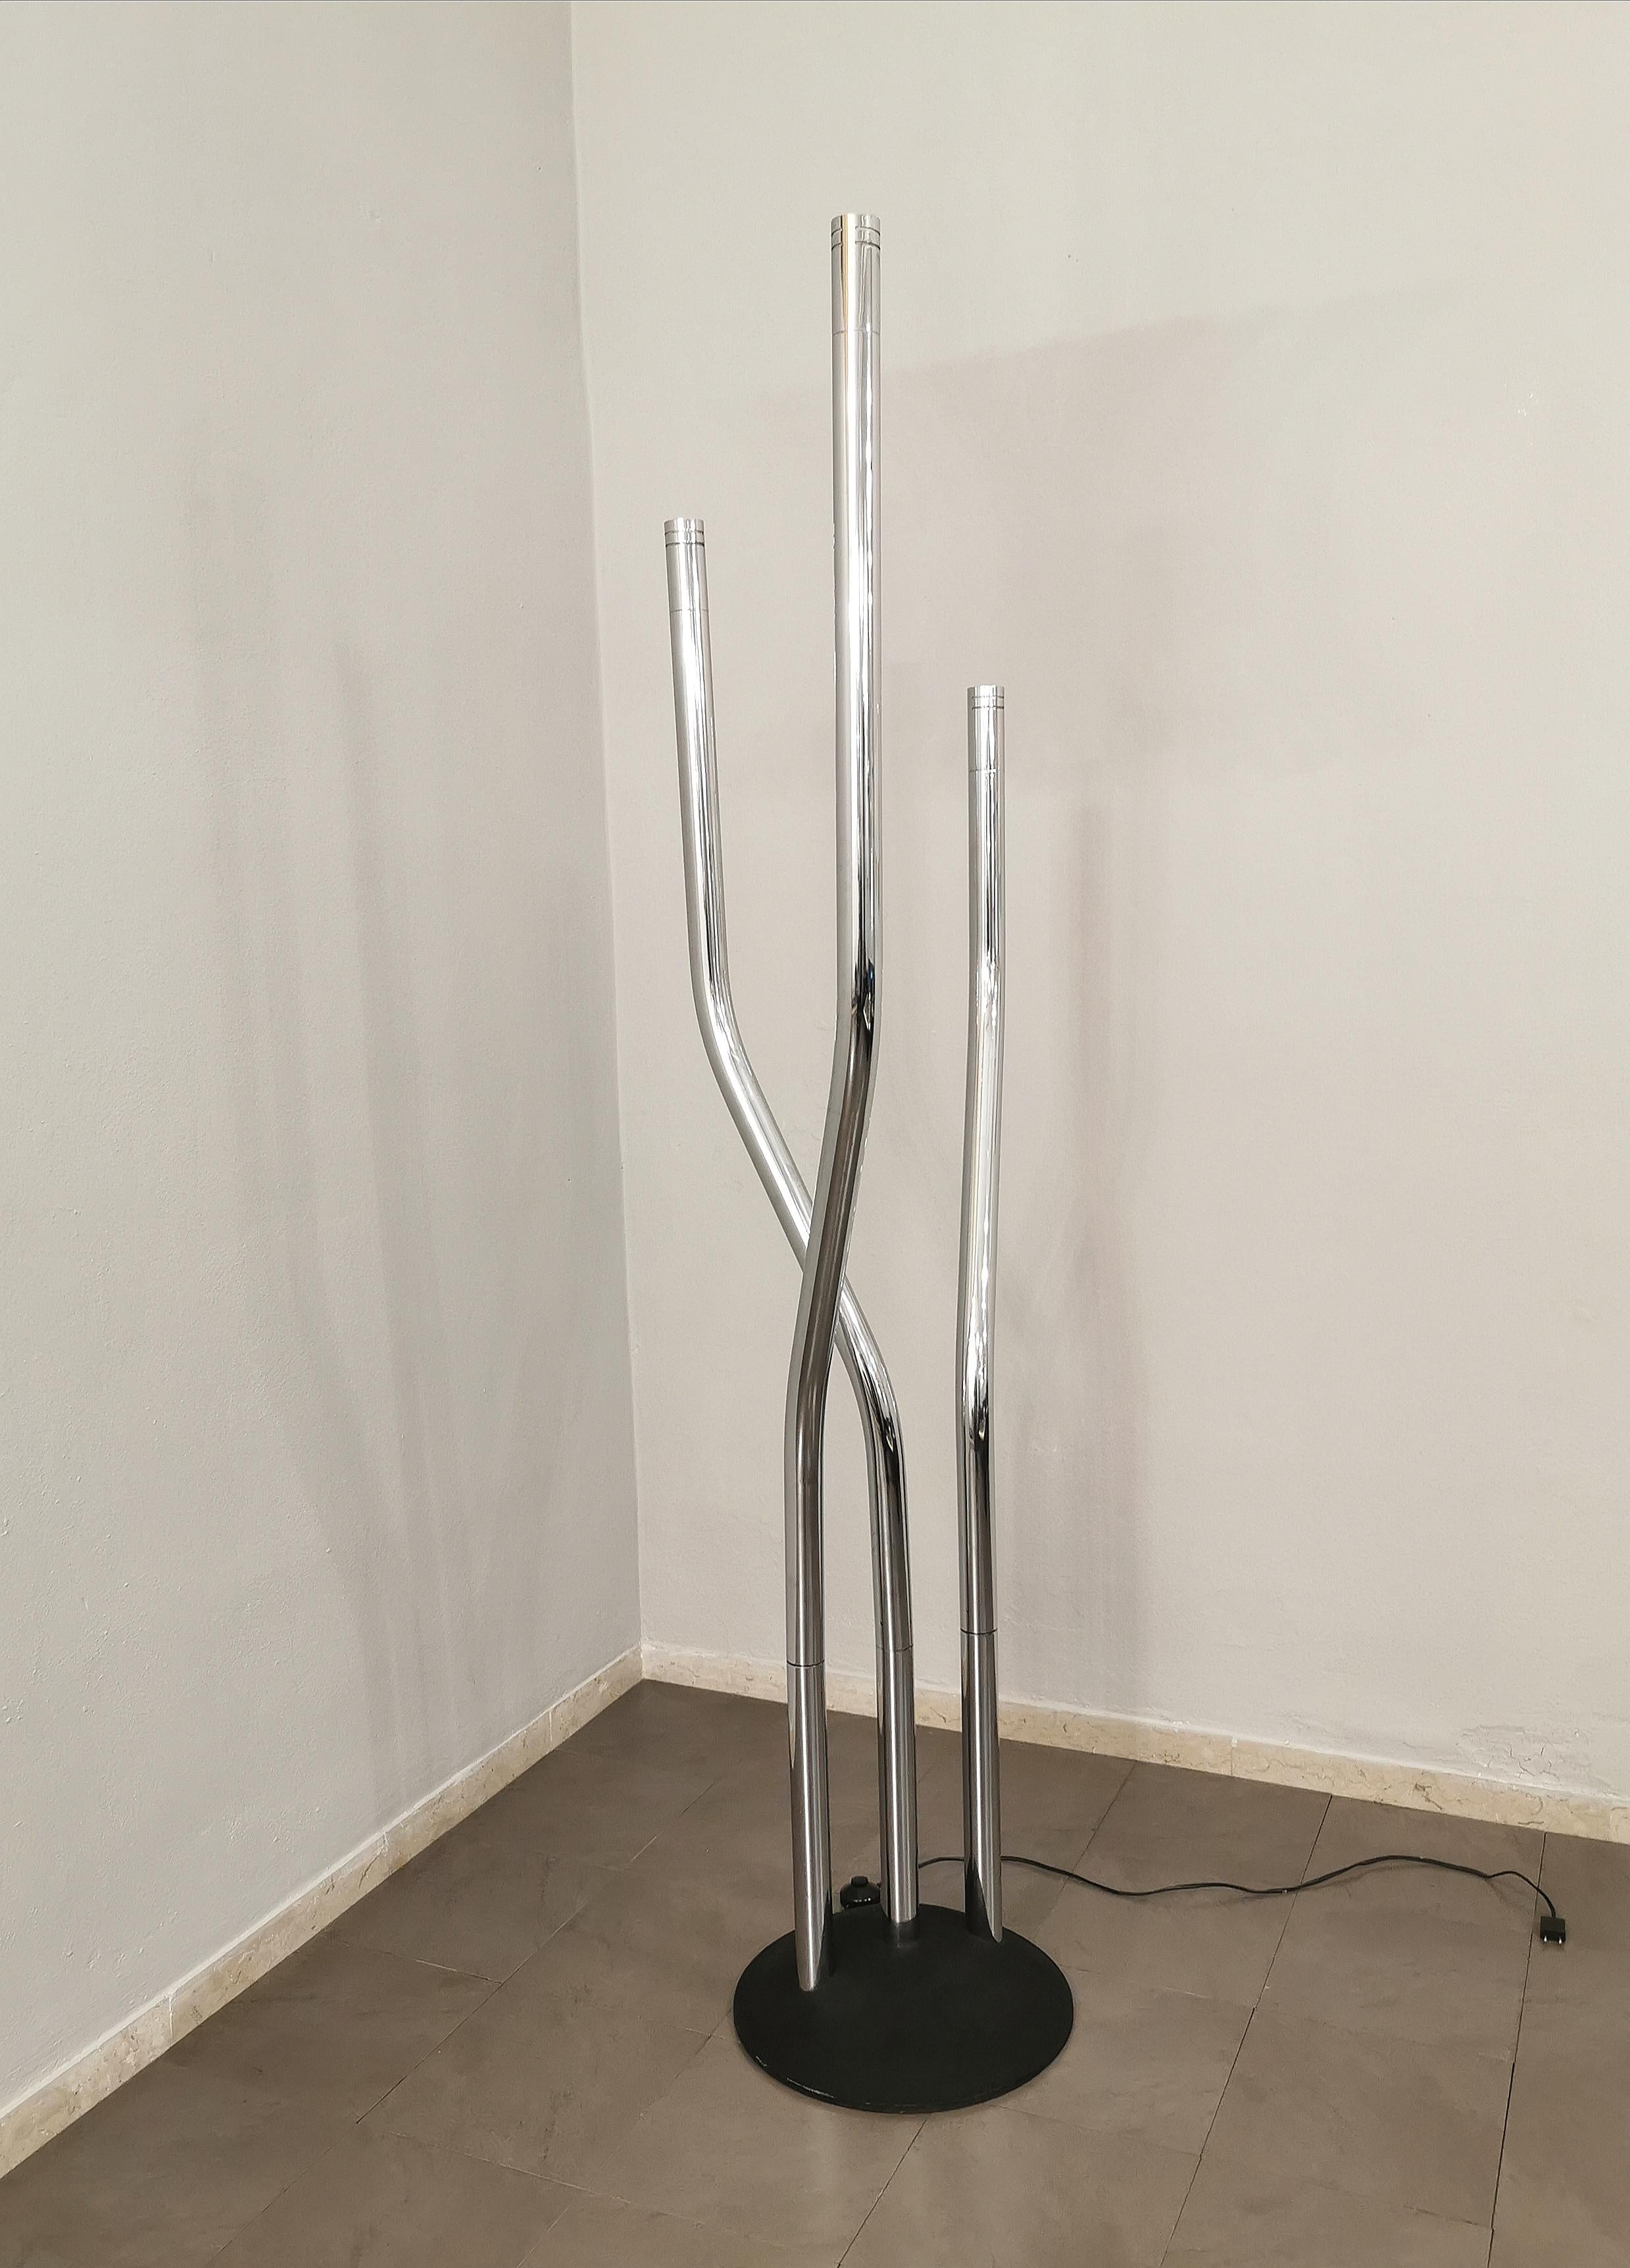 Rare floor lamp of considerable size by an unknown designer produced in Italy in the 70s. The lamp has a metal base in the shape of a half sphere, where 3 tubular chromed metal rods rise with an 